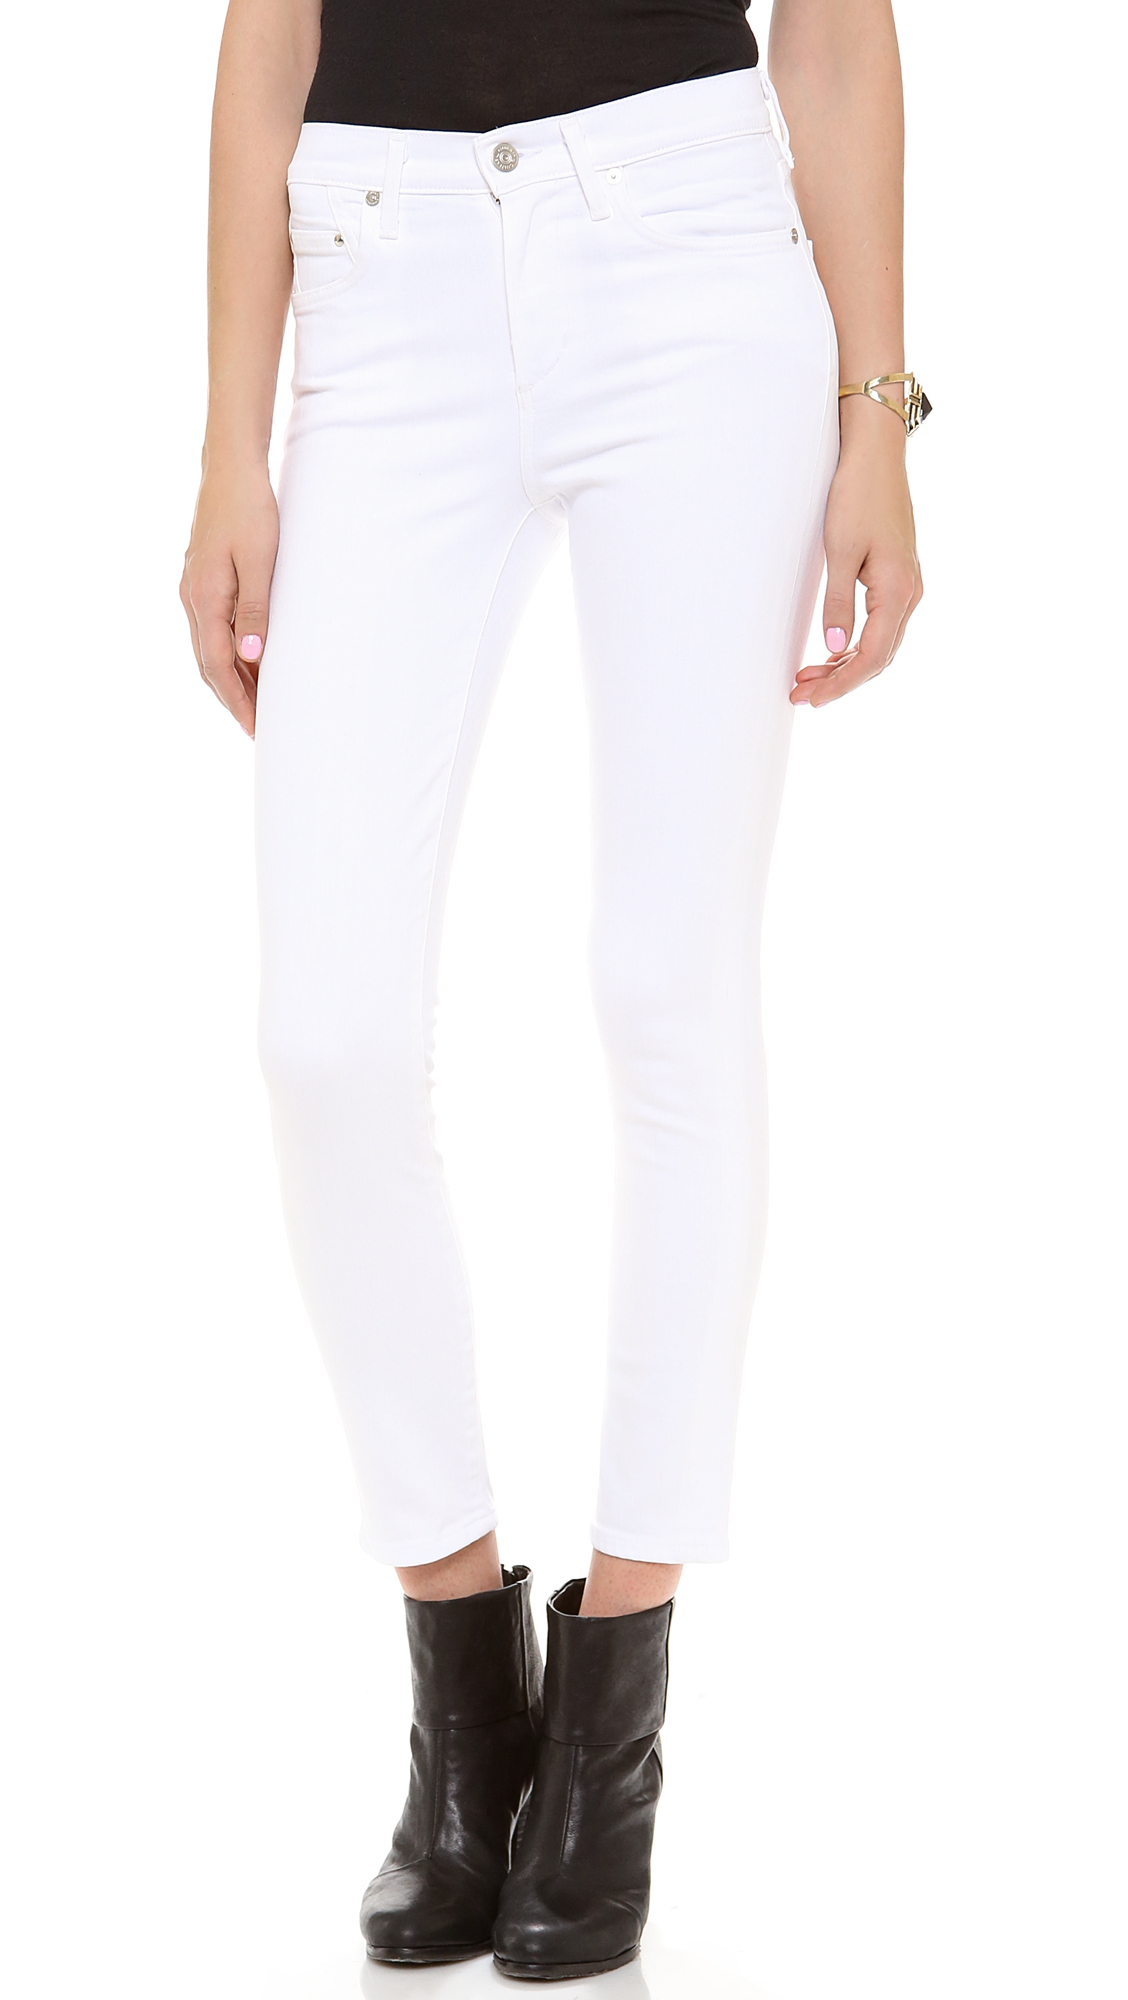 Citizens of humanity Crop Rocket High Rise Skinny Jeans in White (Optic White) | Lyst